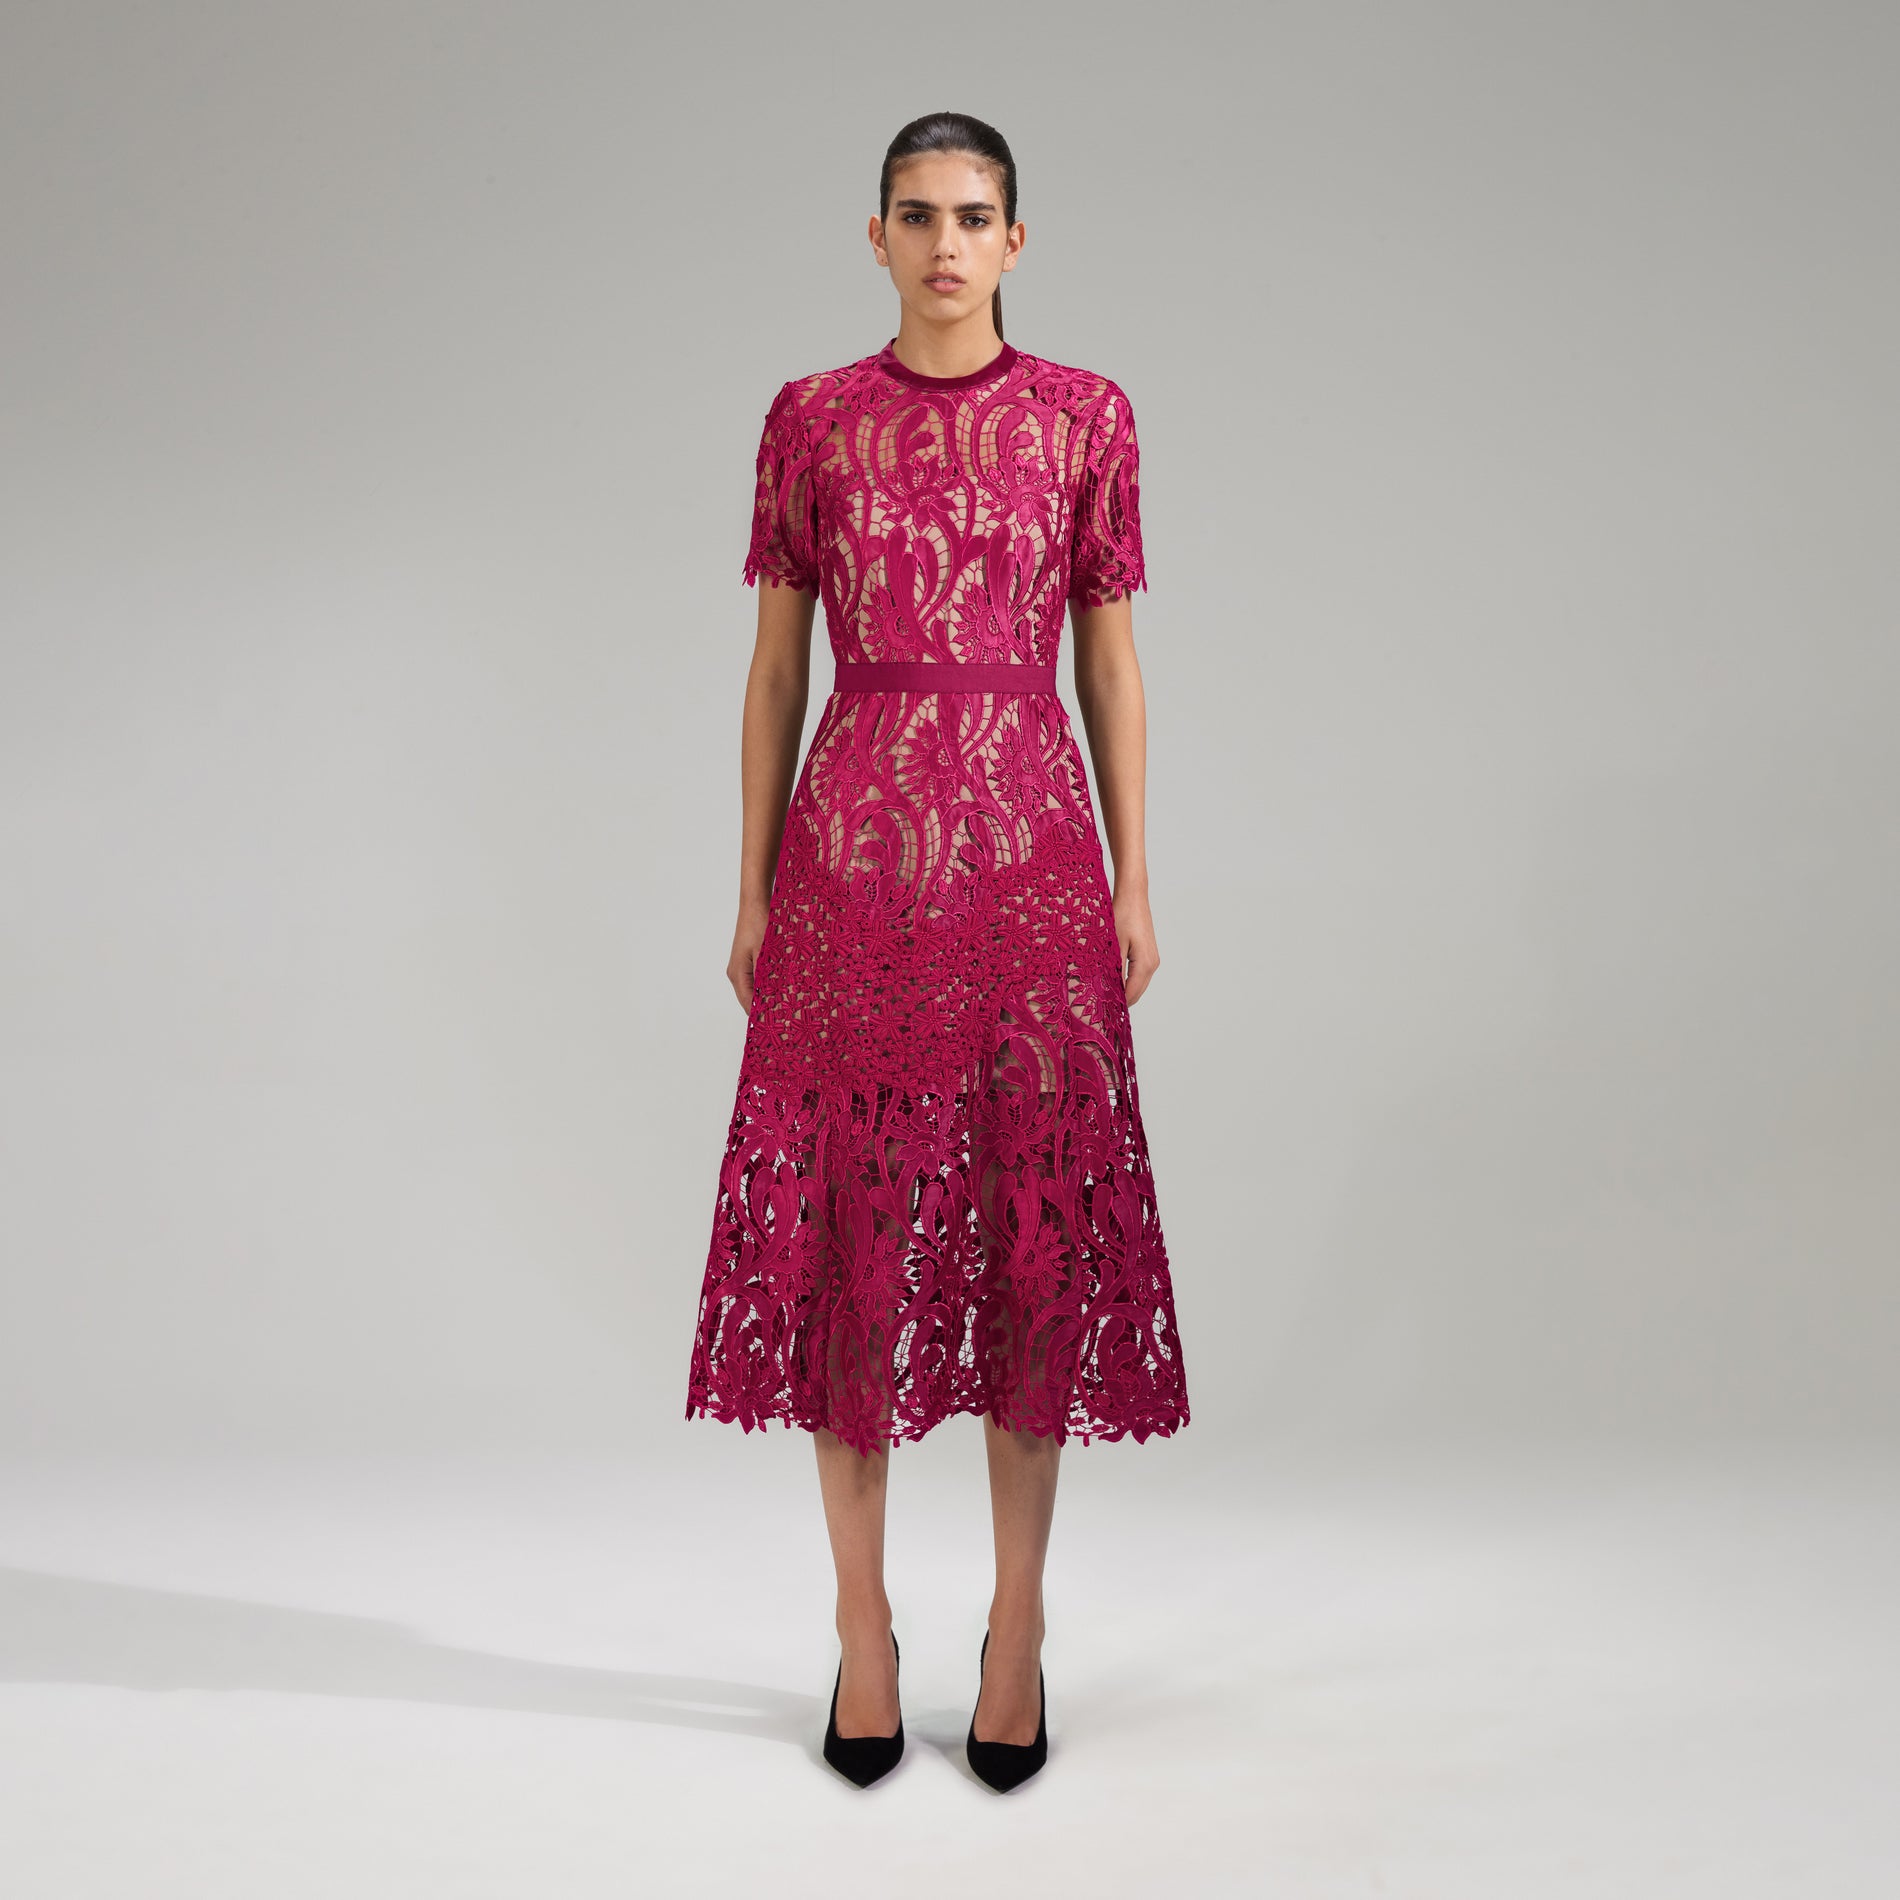 A woman wearing the Burgundy Floral Lace Midi Dress